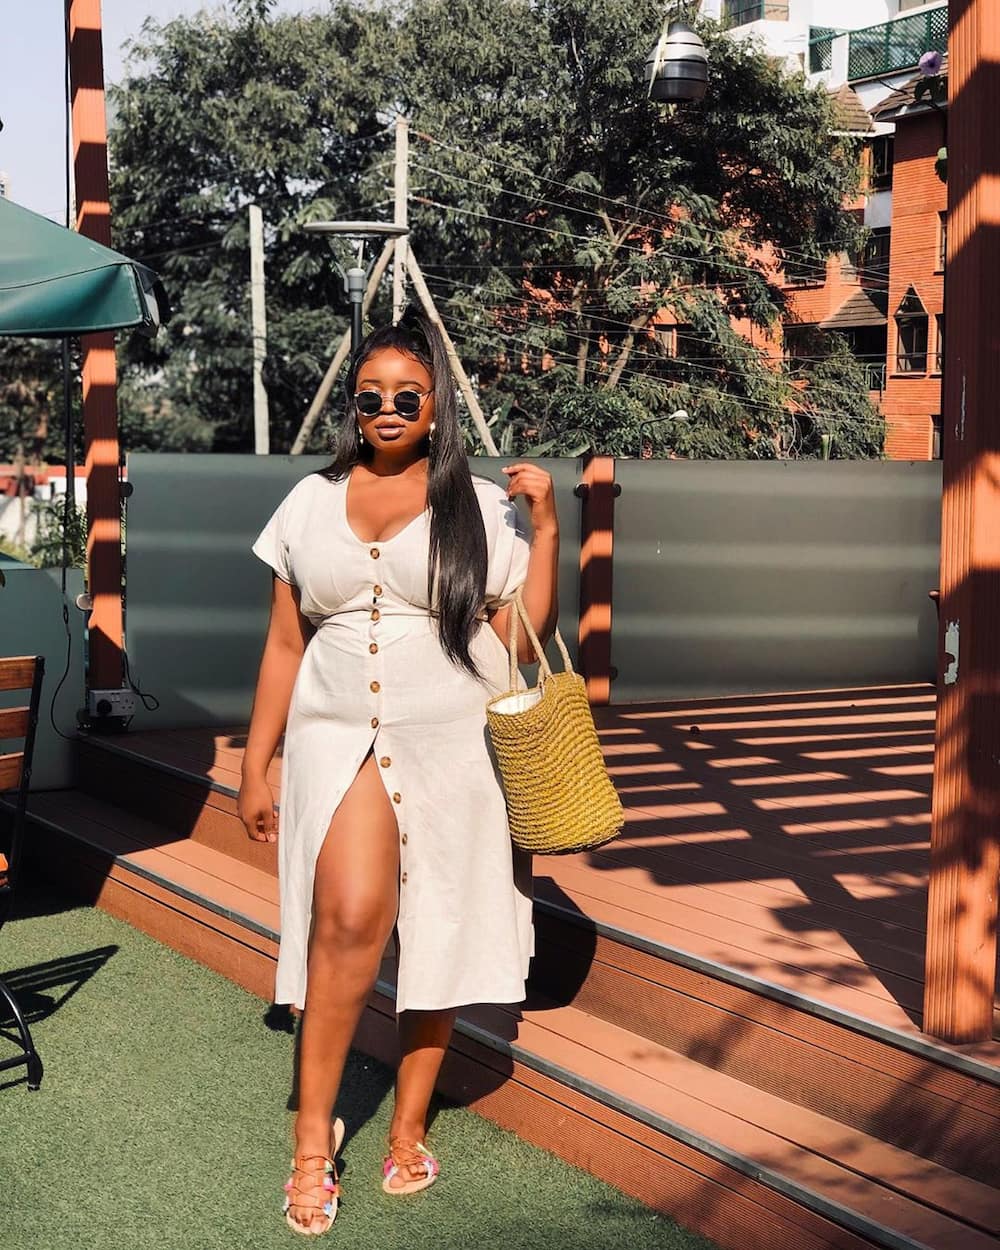 Thickleeyonce Instagram